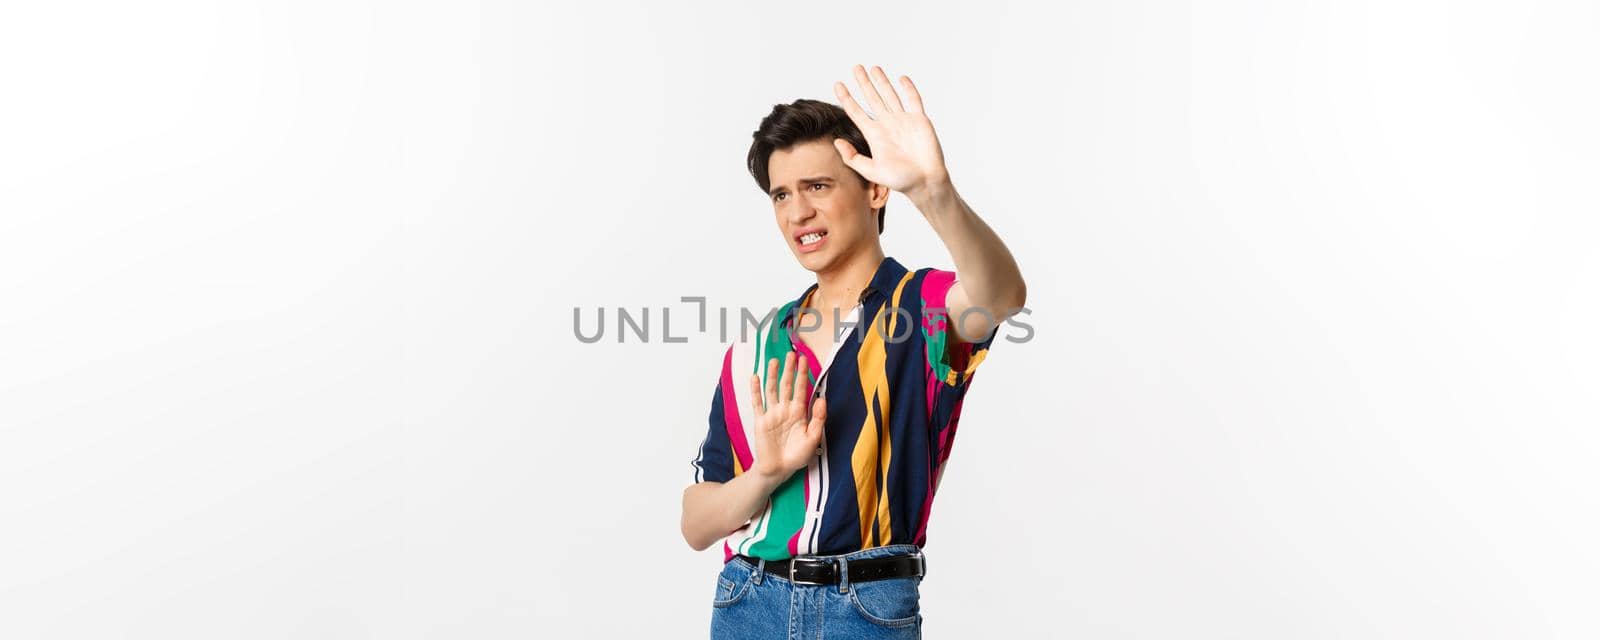 Timid and displeased androgynous man asking to stop, raising hands defensive and grimacing, standing over white background.